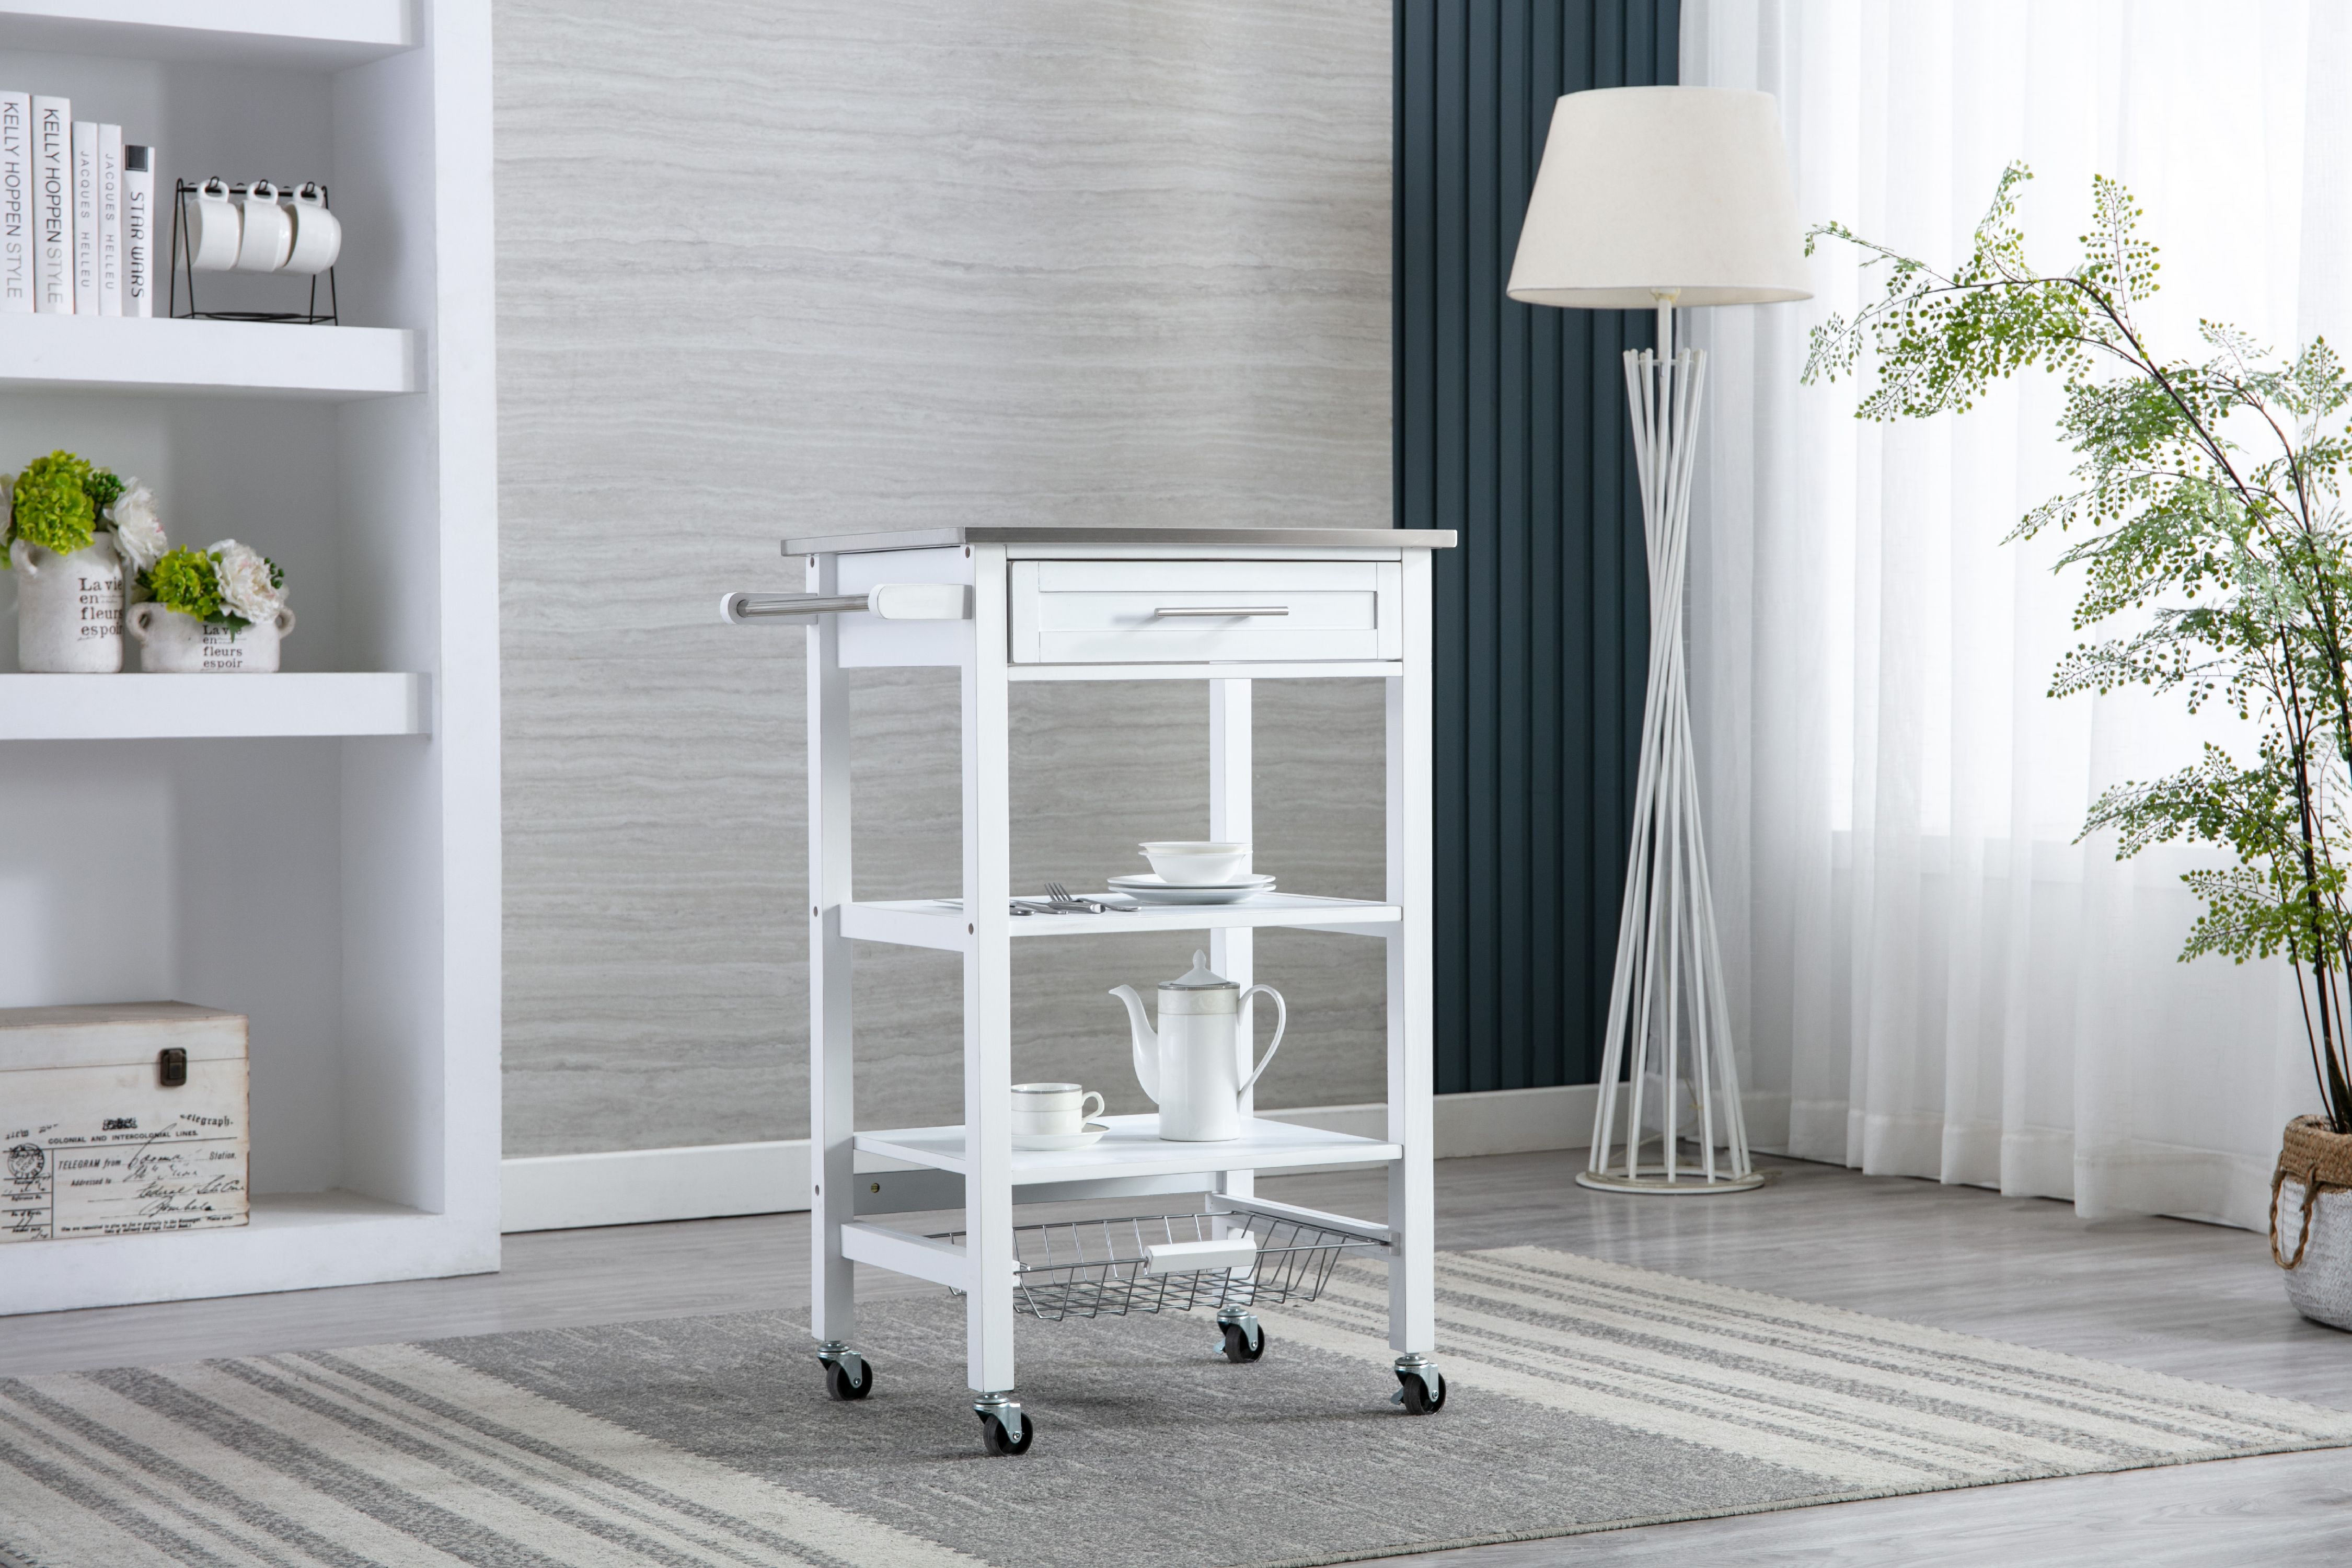 Picture of Boraam 50661 Hennington Kitchen Cart with Stainless Steel Top - White Wash